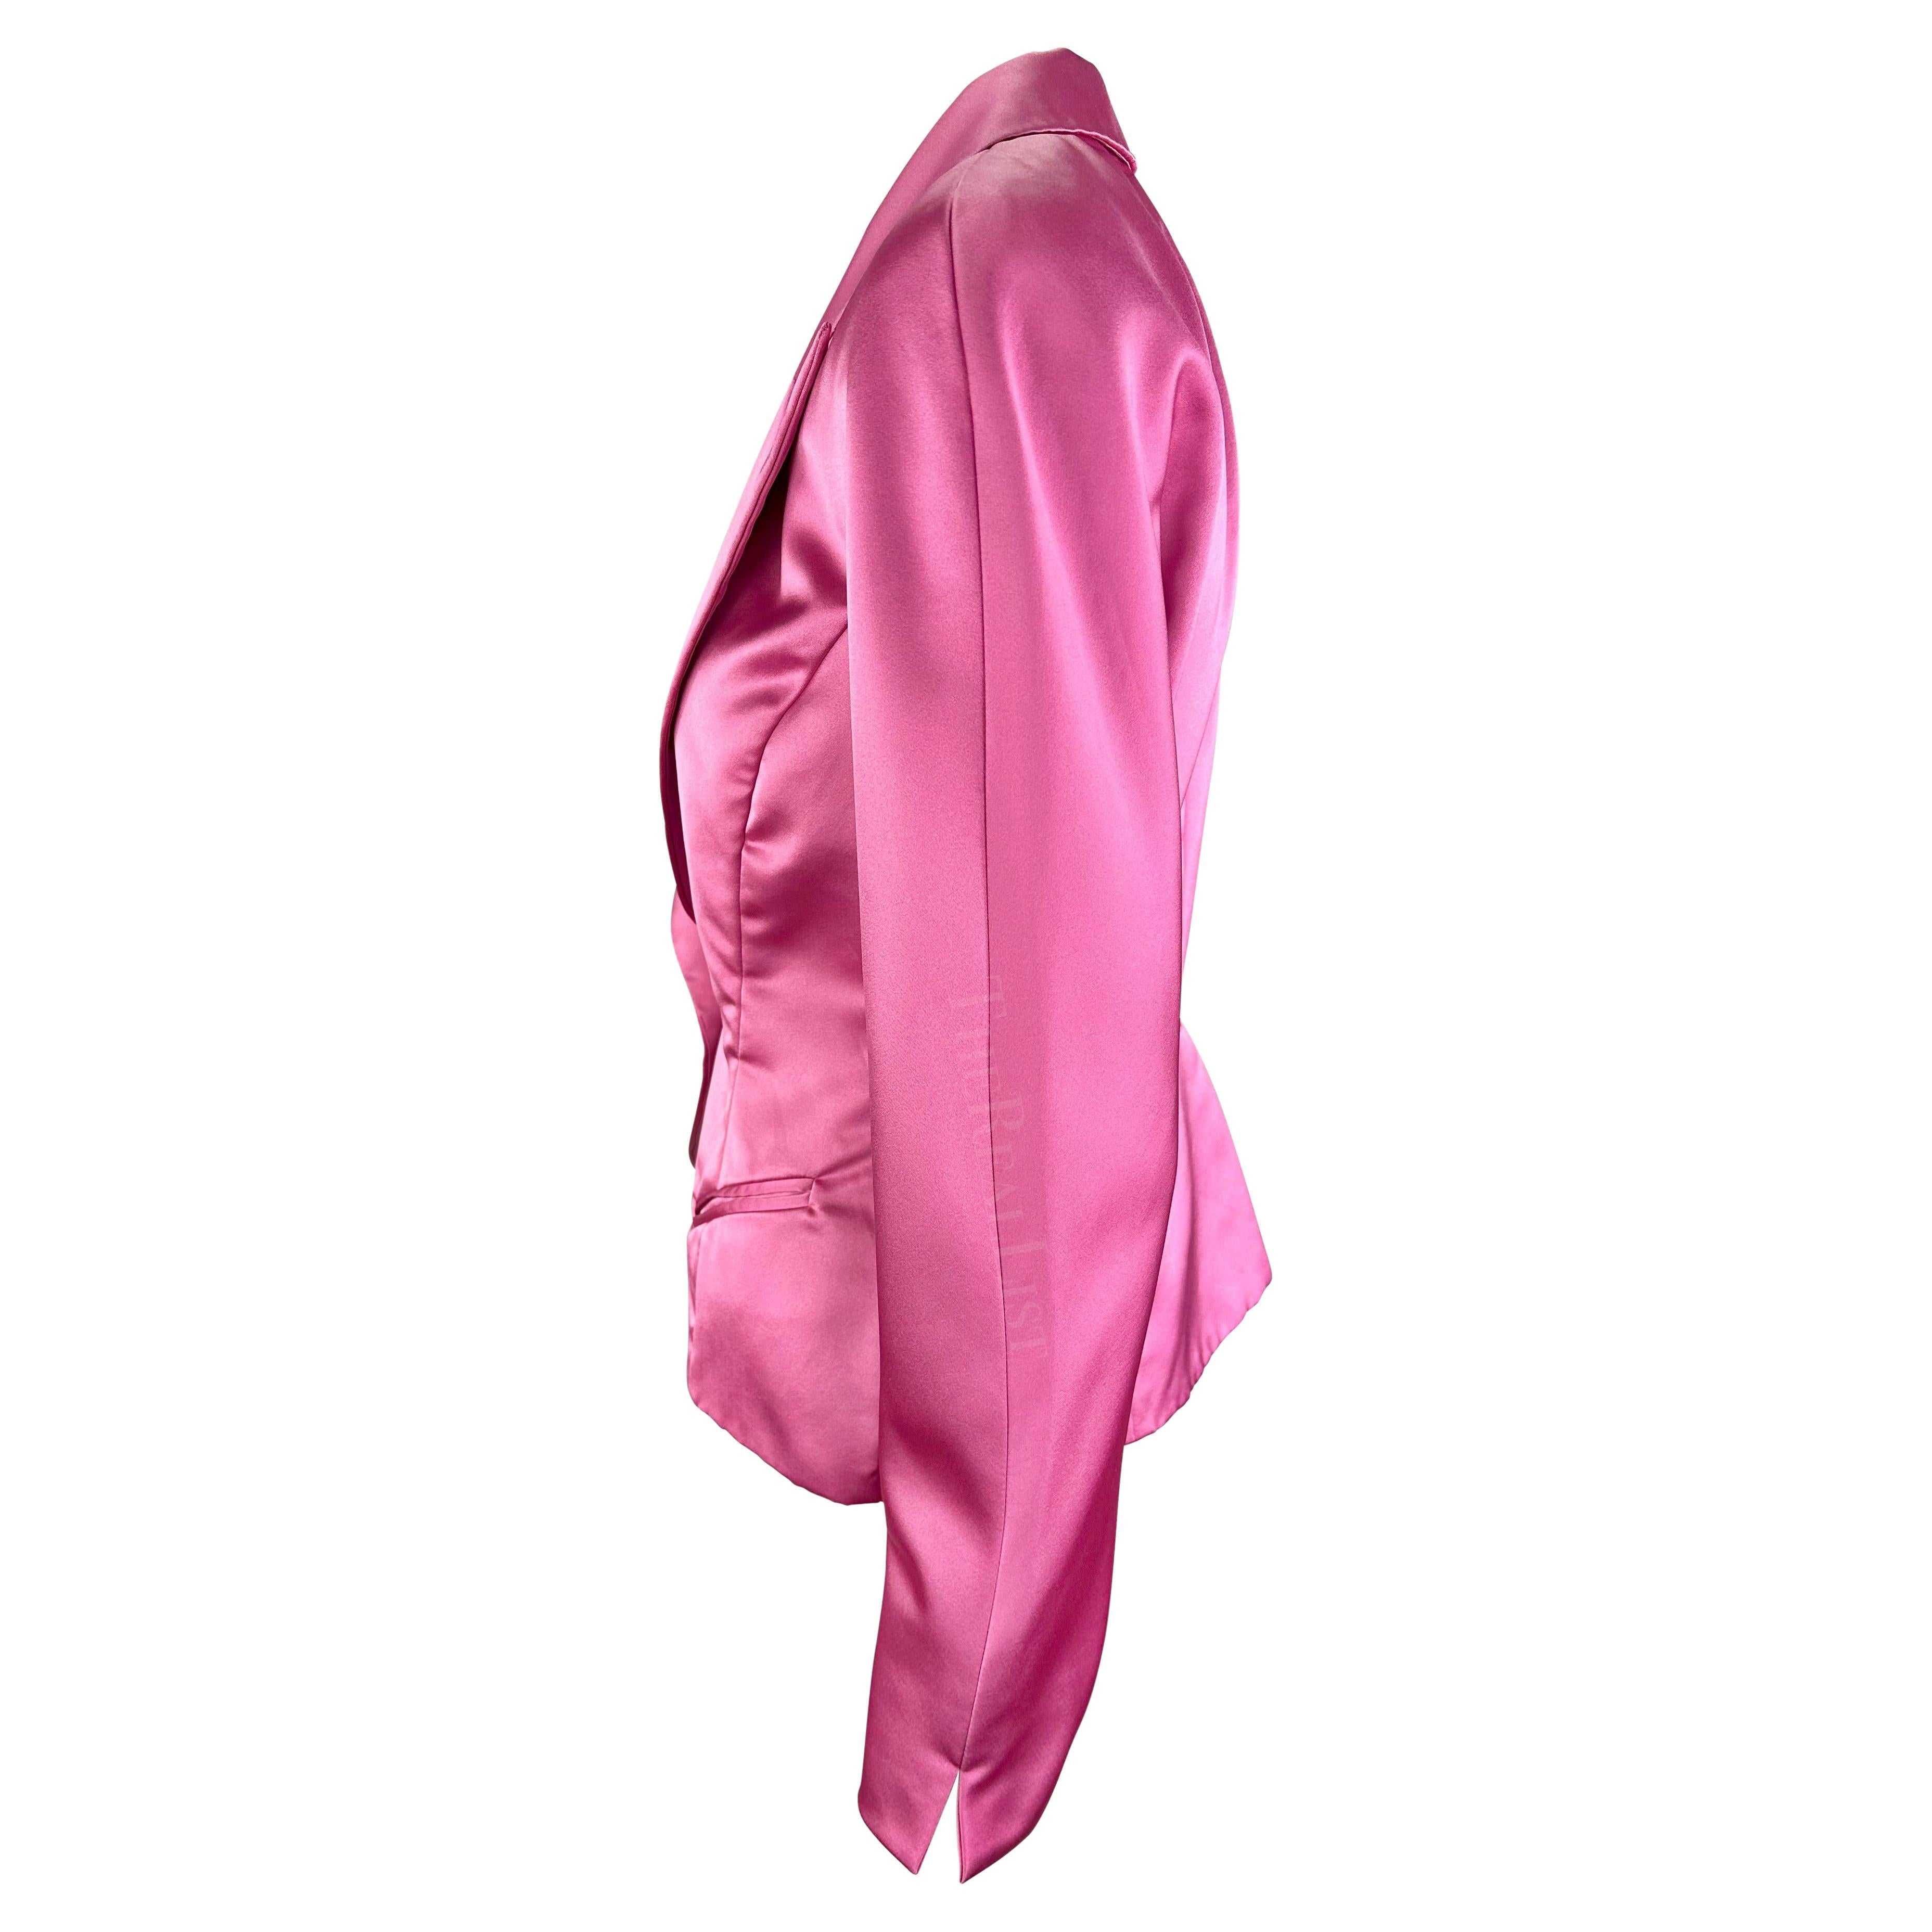 1980s Christian Dior Bubblegum Pink Satin Cinched Blazer Jacket In Excellent Condition For Sale In West Hollywood, CA